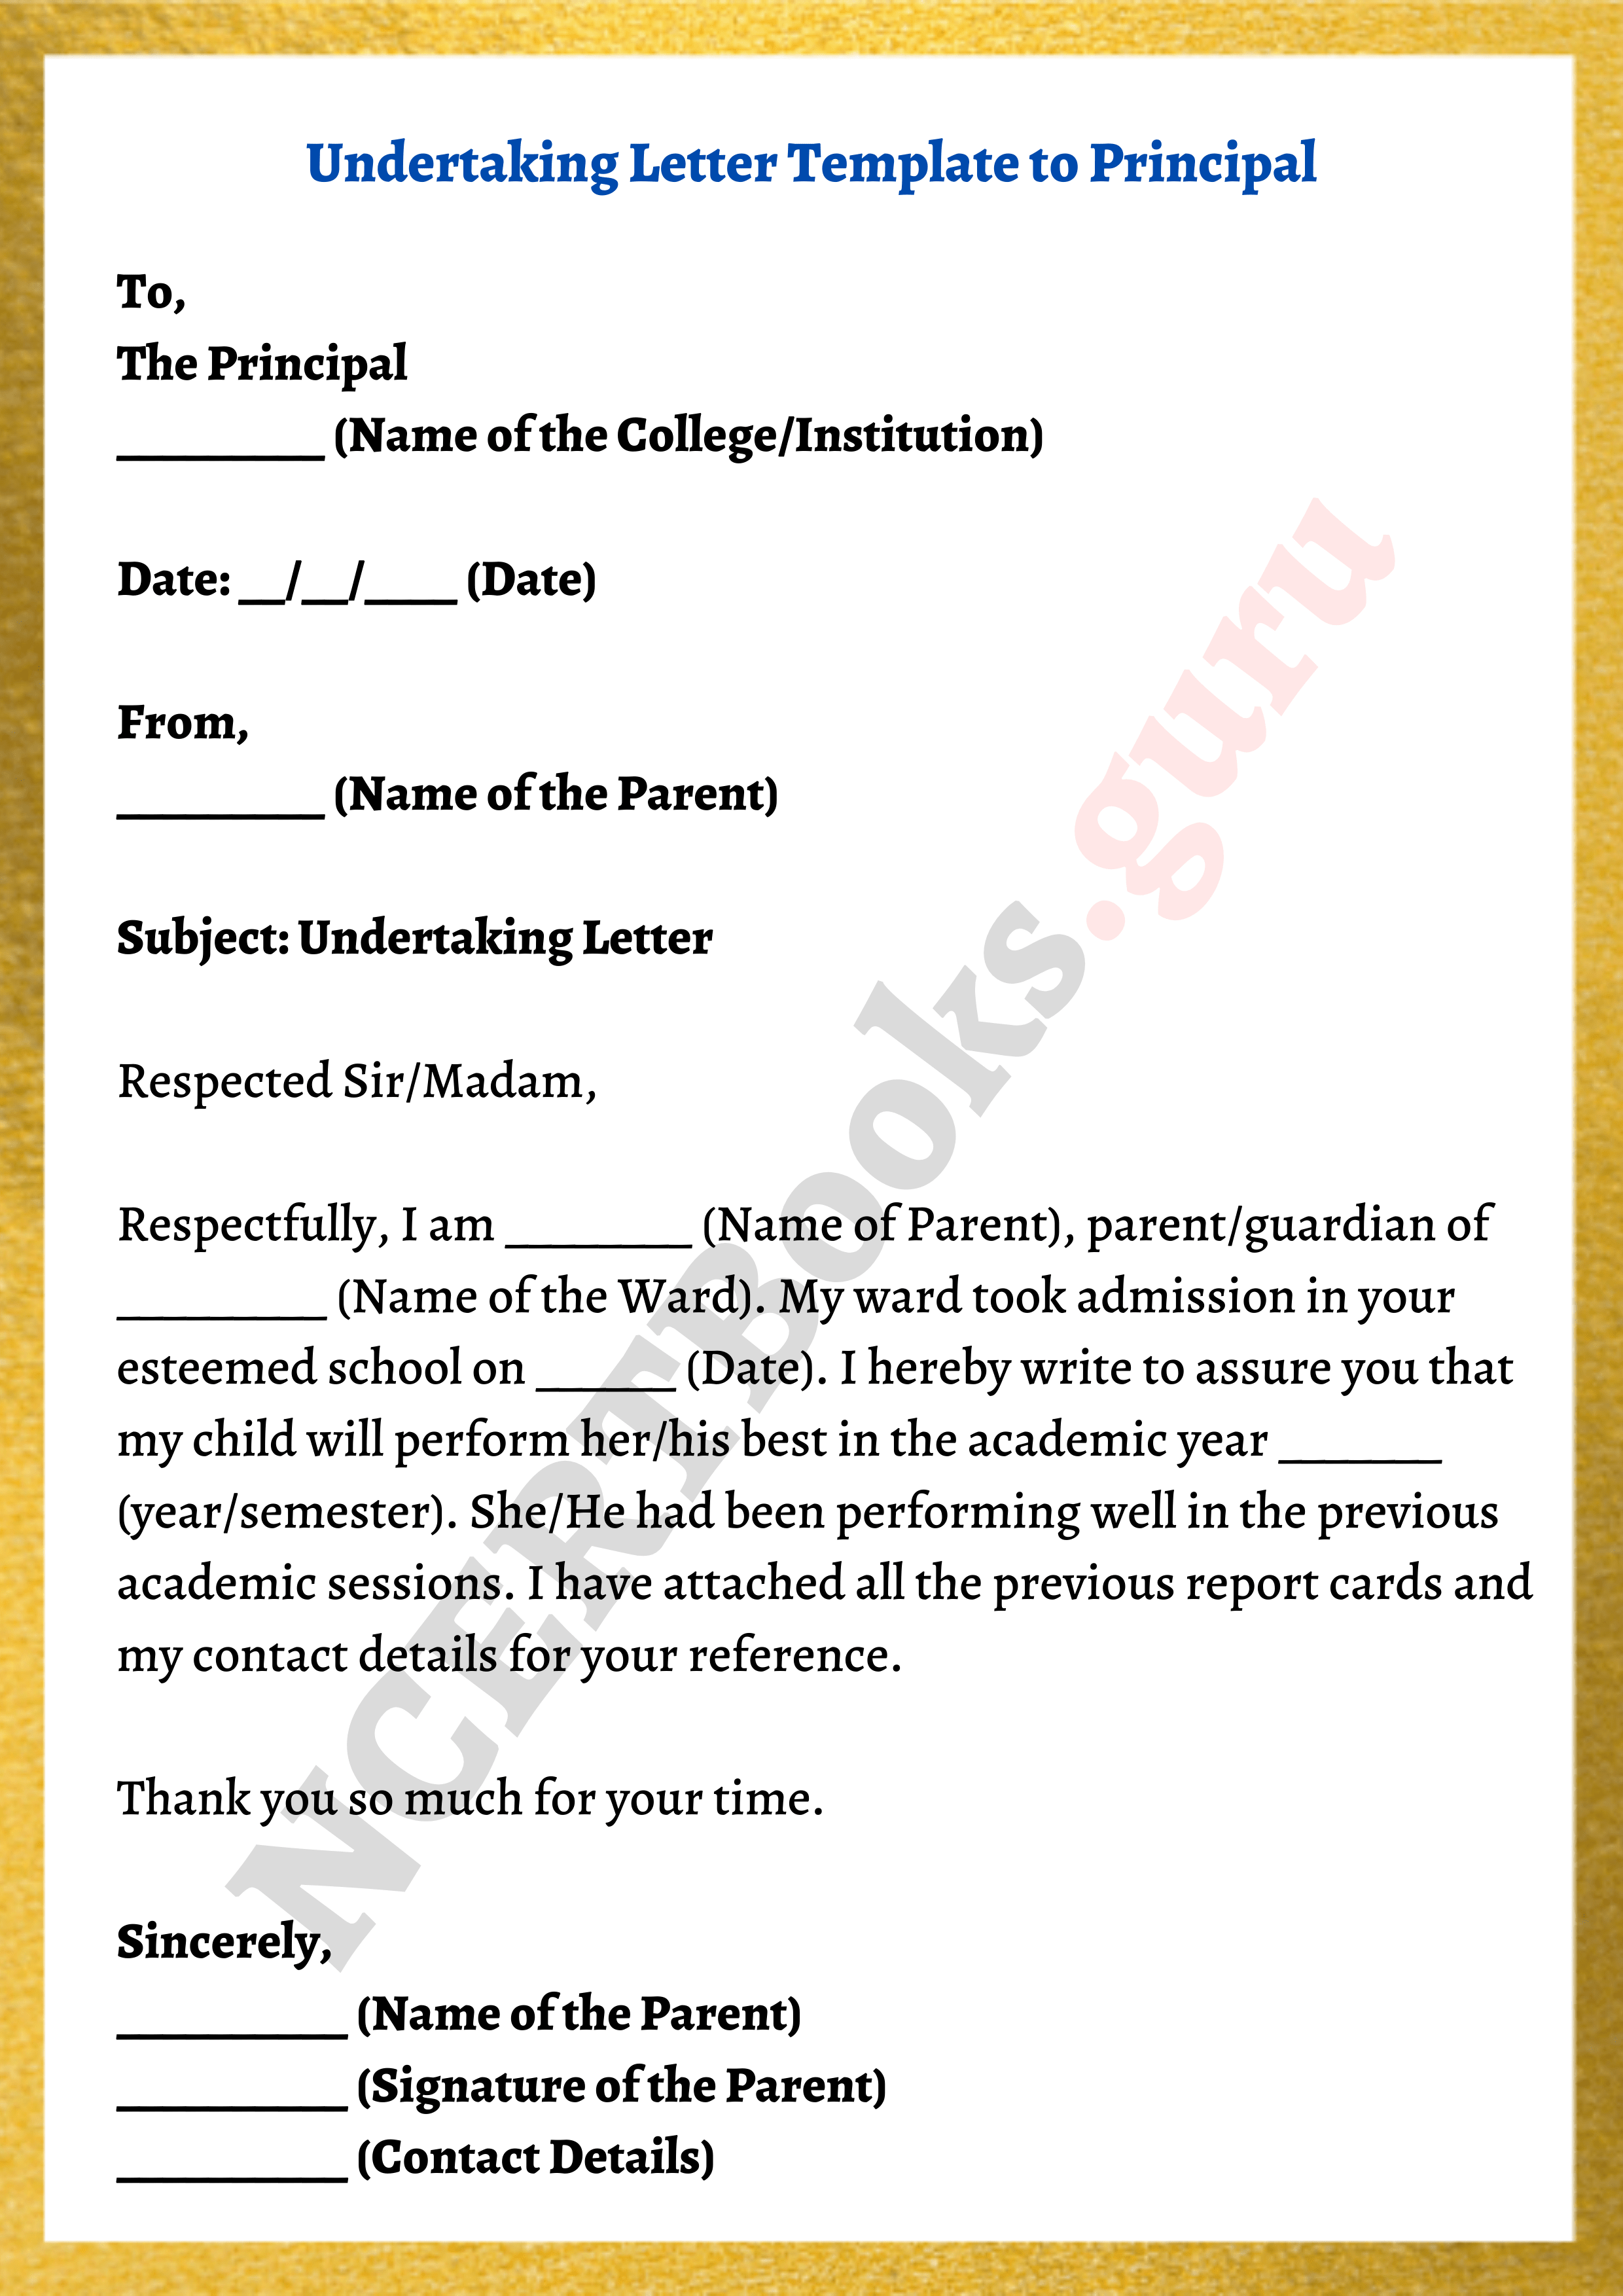 template for letter of undertaking